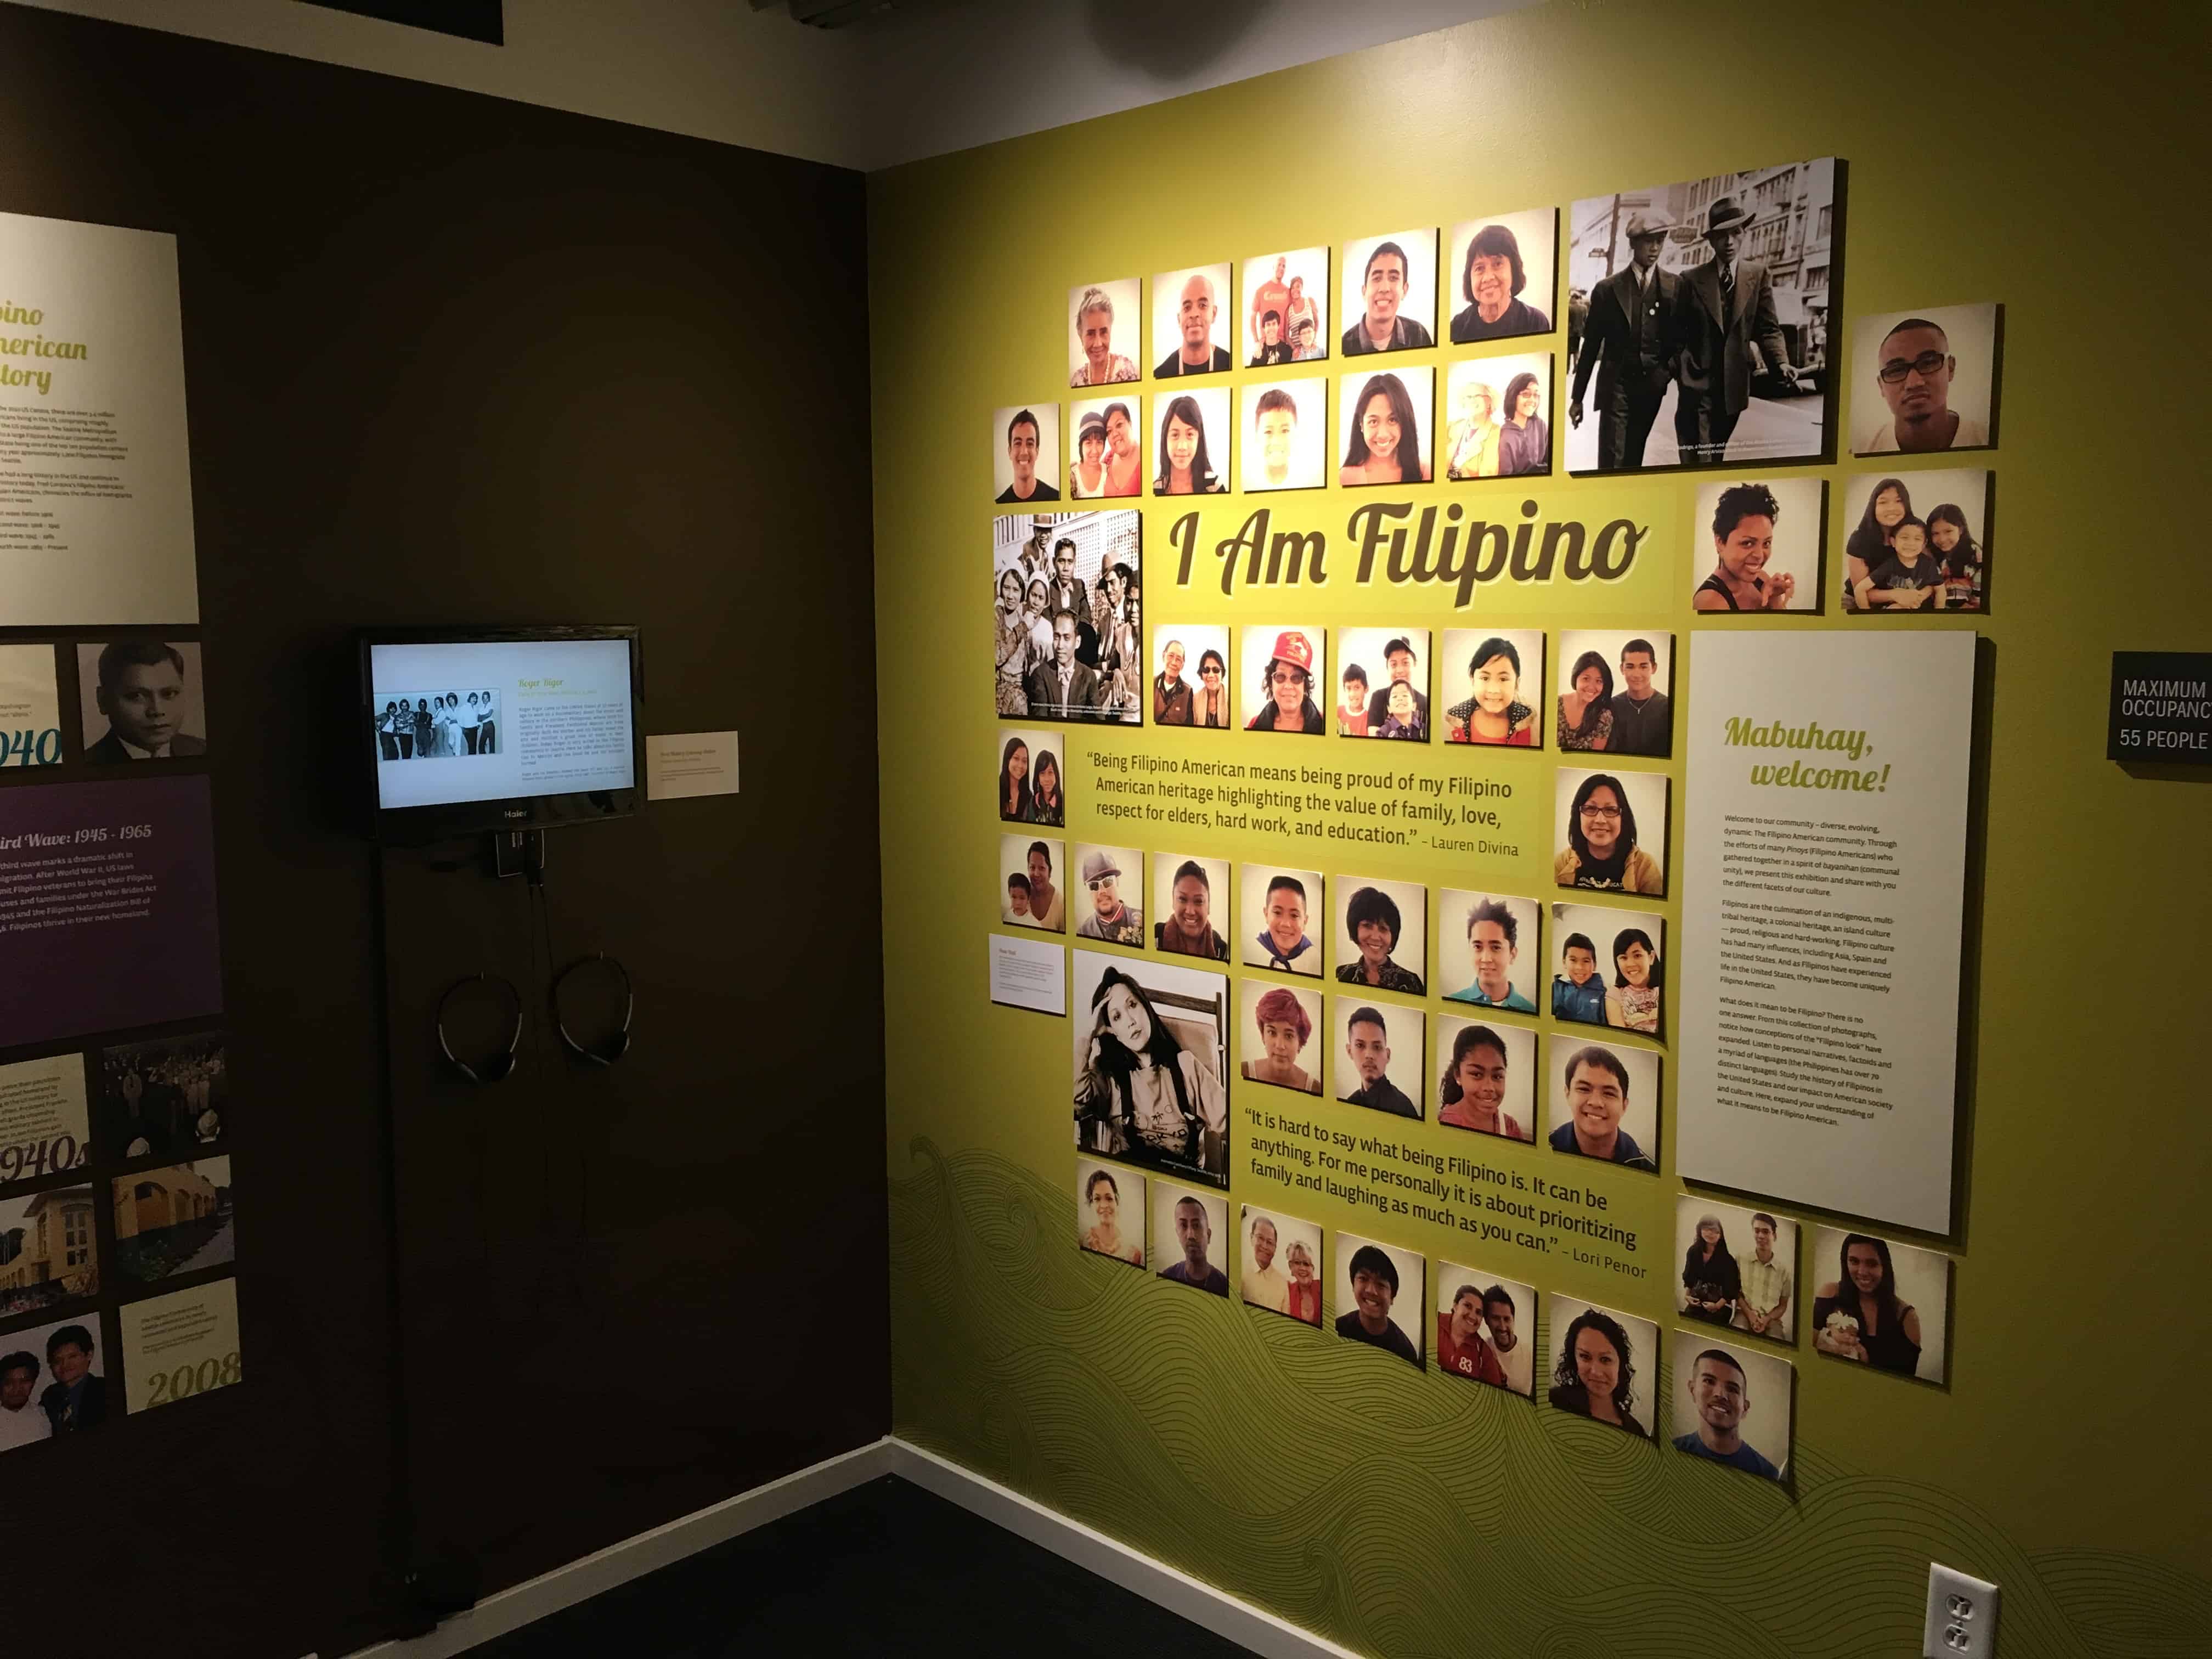 I Am Filipino at the Wing Luke Museum in the International District in Seattle, Washington